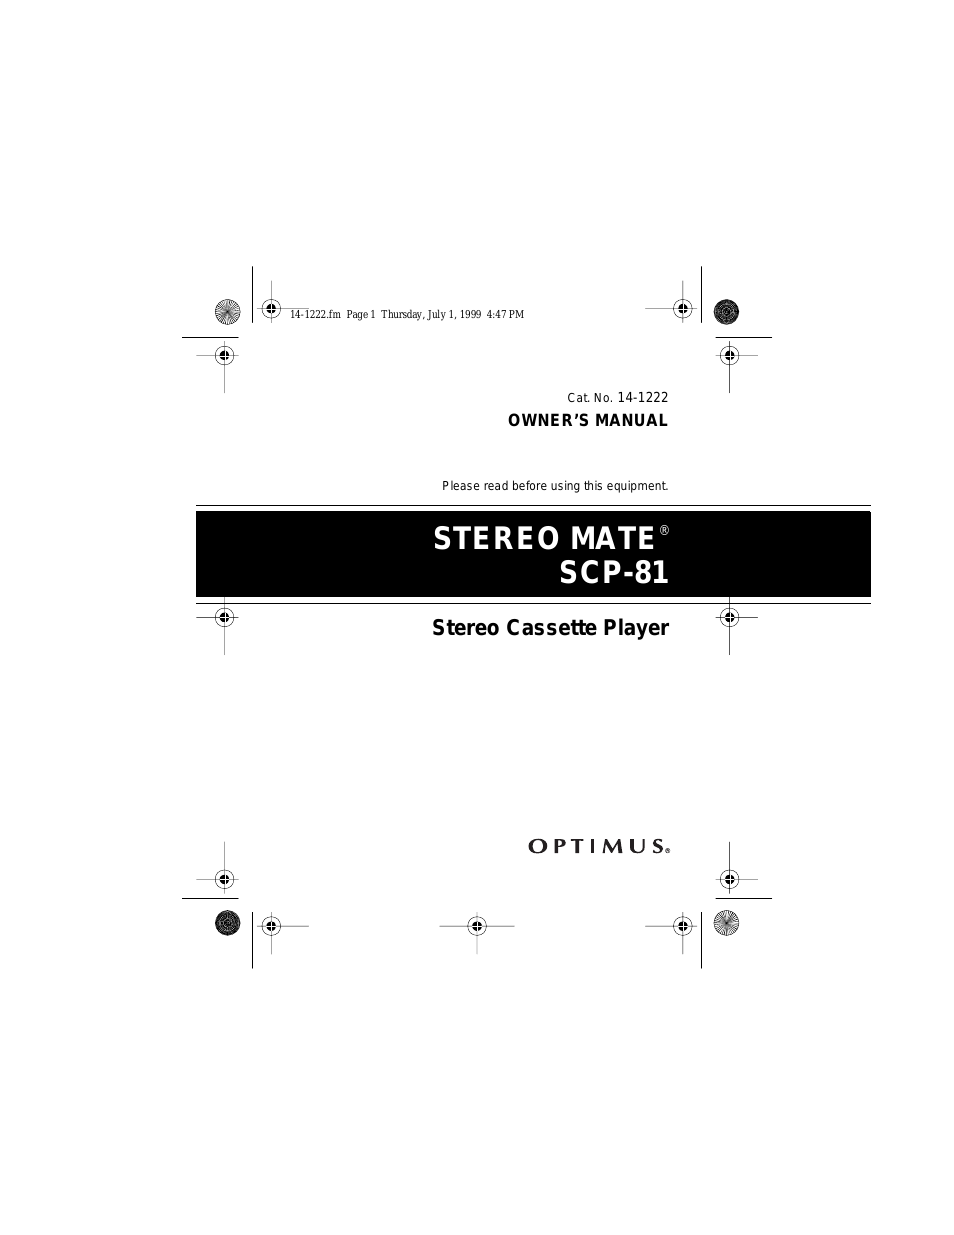 STEREO MATE 14-1222